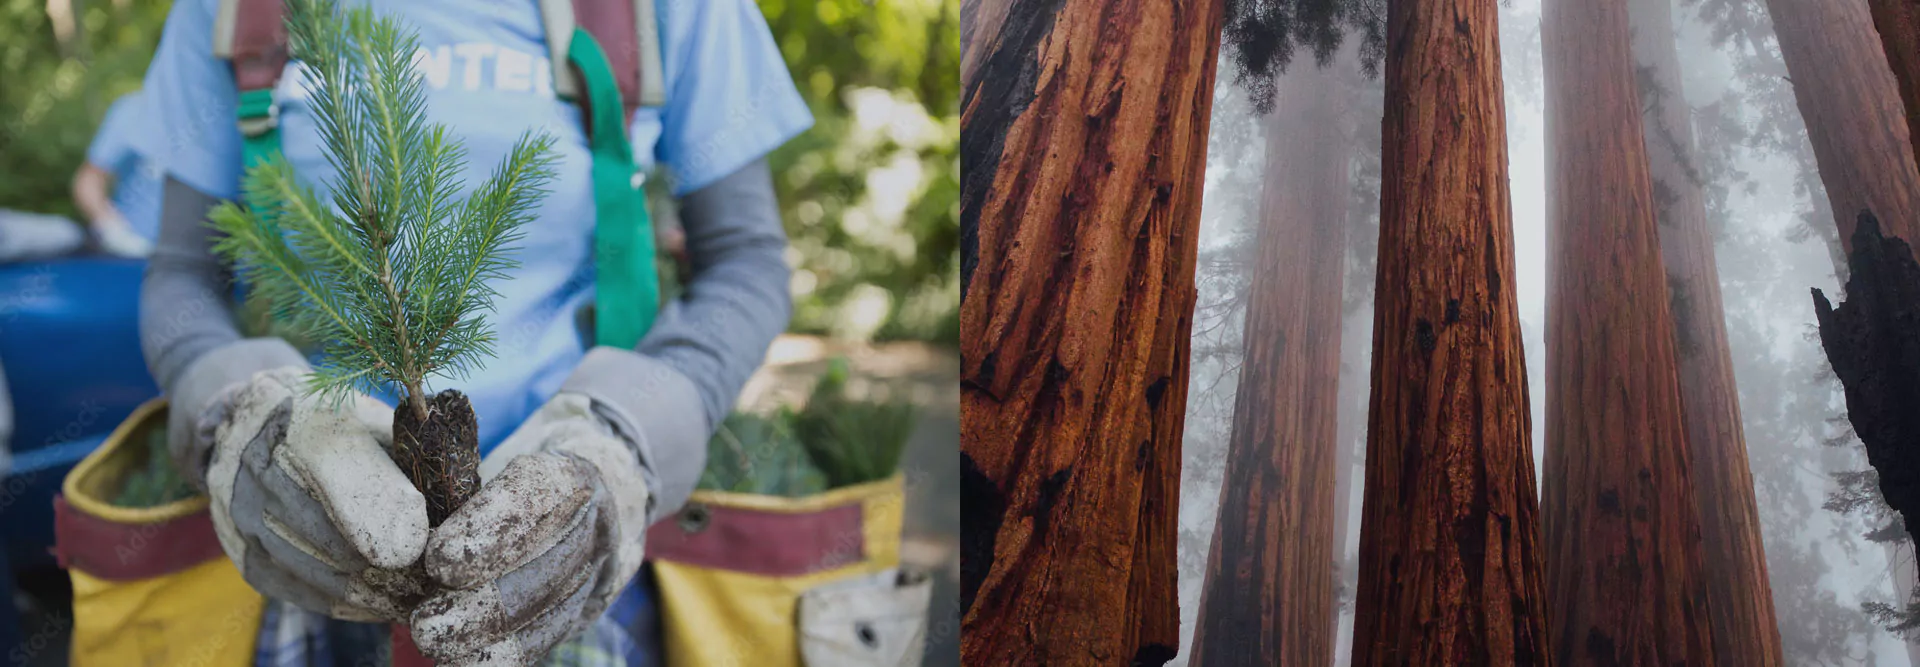 Two photos - one of a gardener planting a new pine tree and one of an old-growth forest.